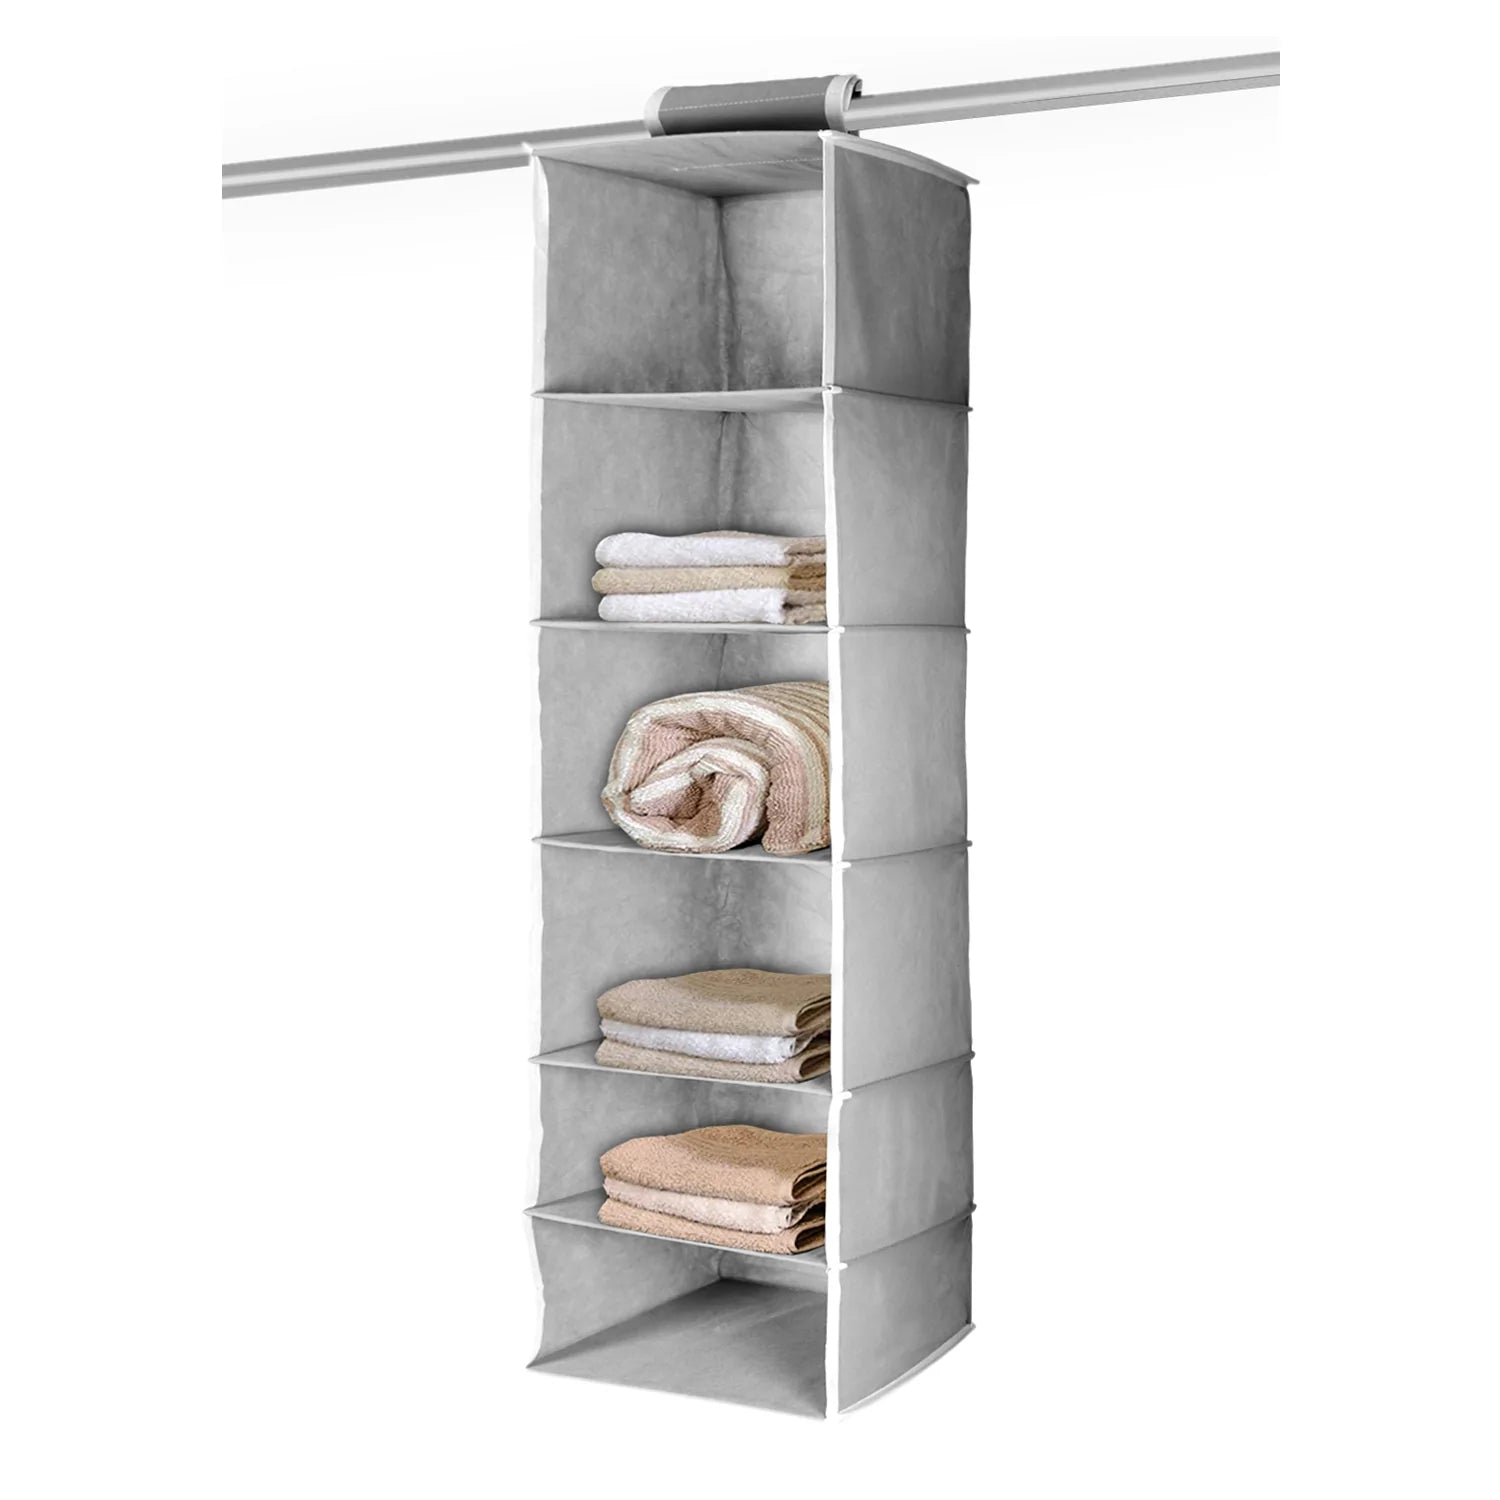 6741 Non-Woven Fabric Cloth 6 Selves Hanging Storage Wardrobe Organizer with PVC Zippered Closure 6 Layers Chain Cloth 